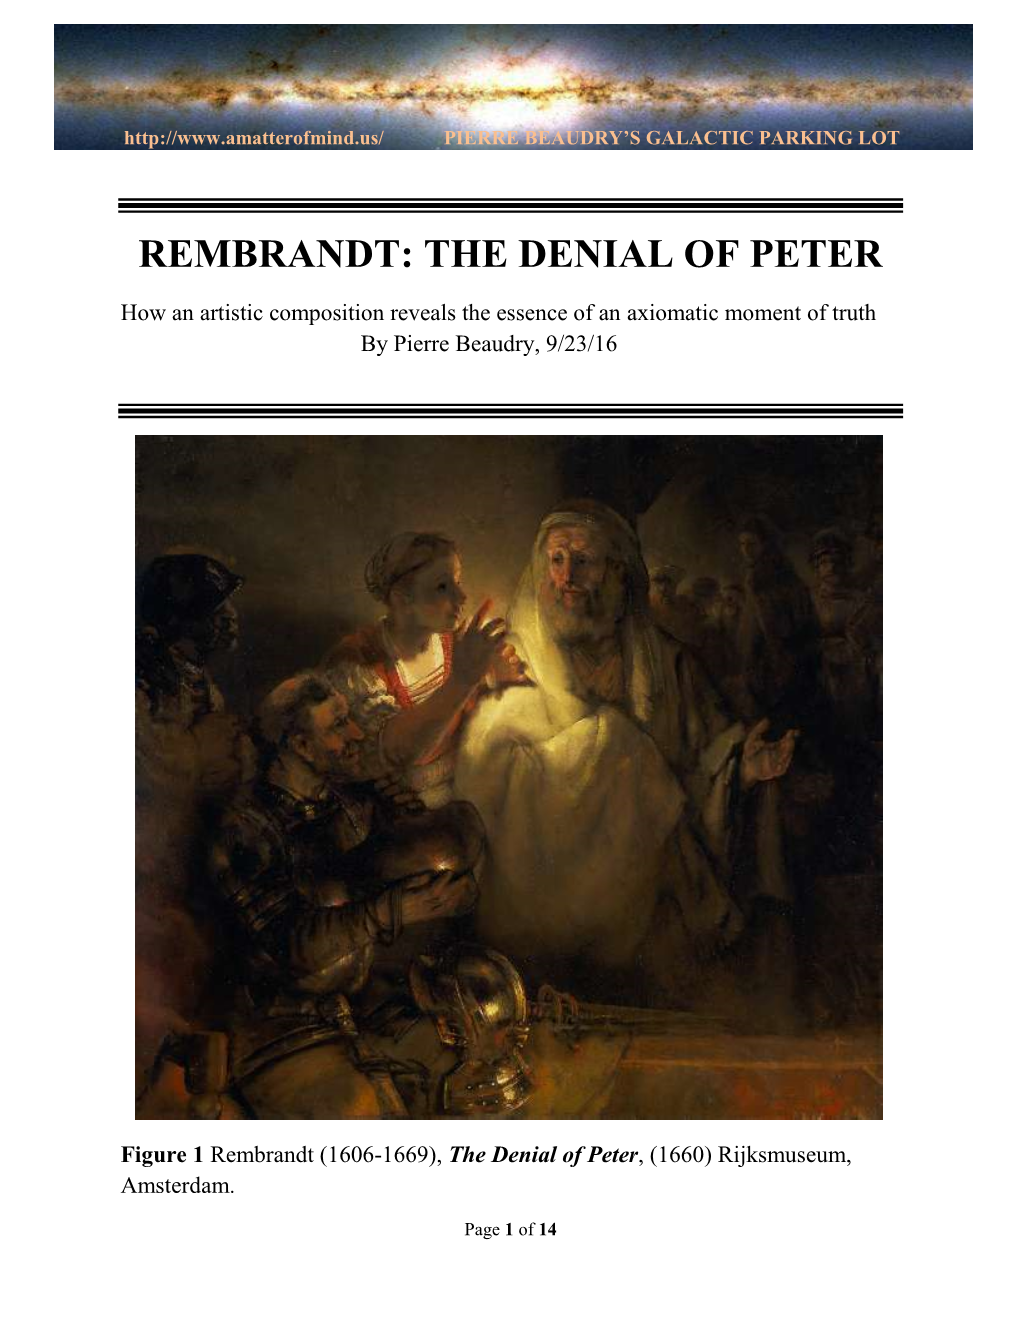 Rembrandt: the Denial of Peter